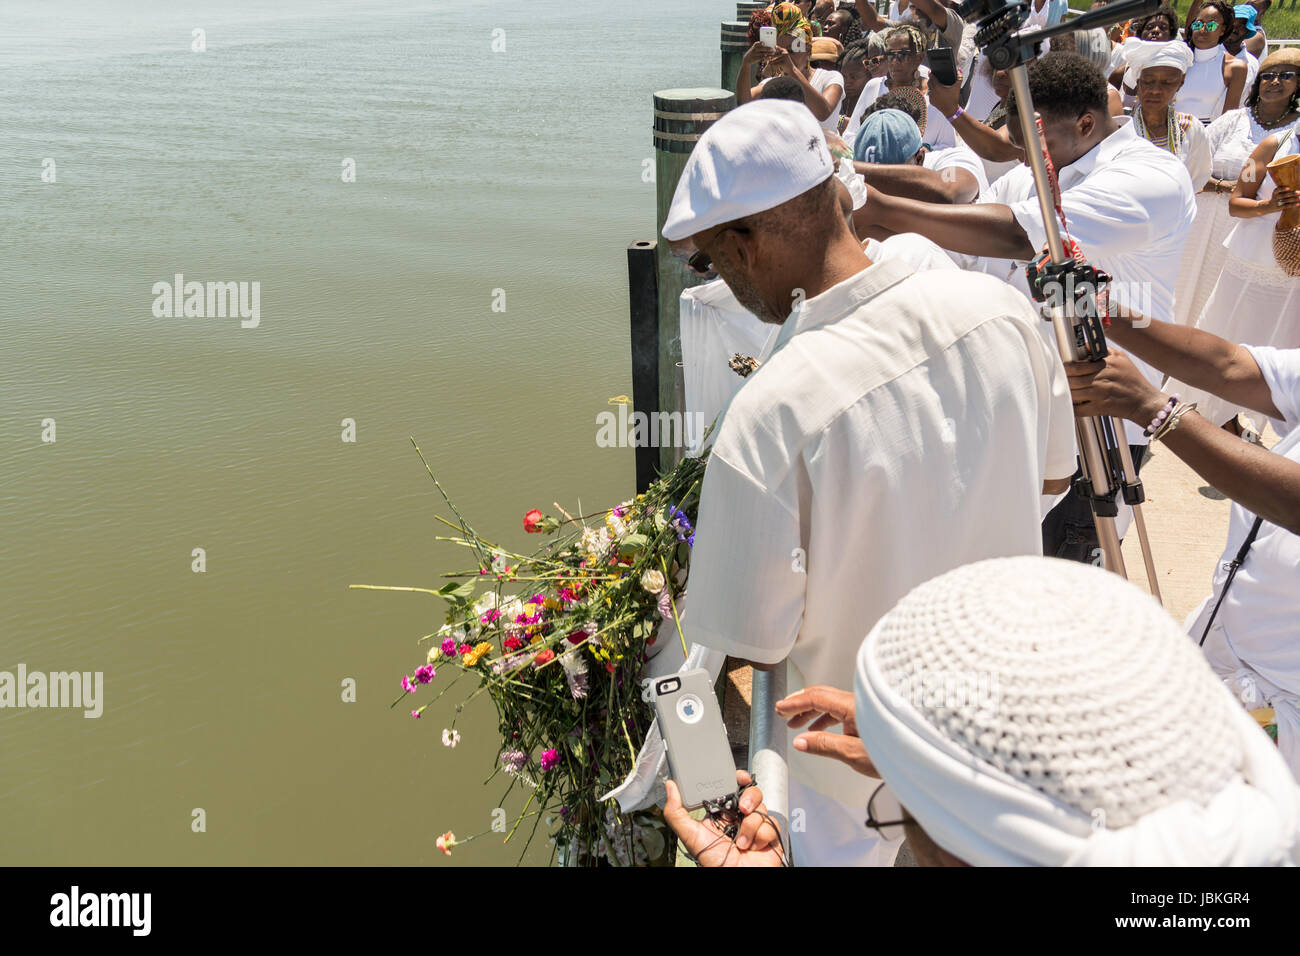 Public radio host of the Roots Musik Karamu show, Osei Chandler drops flower offerings in the water during a remembrance ceremony for enslaved Africans that died in the Middle Passage June 10, 2017 in Sullivan's Island, South Carolina. The Middle Passage refers to the triangular trade in which millions of Africans were shipped to the New World as part of the Atlantic slave trade. An estimated 15% of the Africans died at sea and considerably more in the process of capturing and transporting. The total number of African deaths attributable to the Middle Passage voyage is estimated at 2 million. Stock Photo